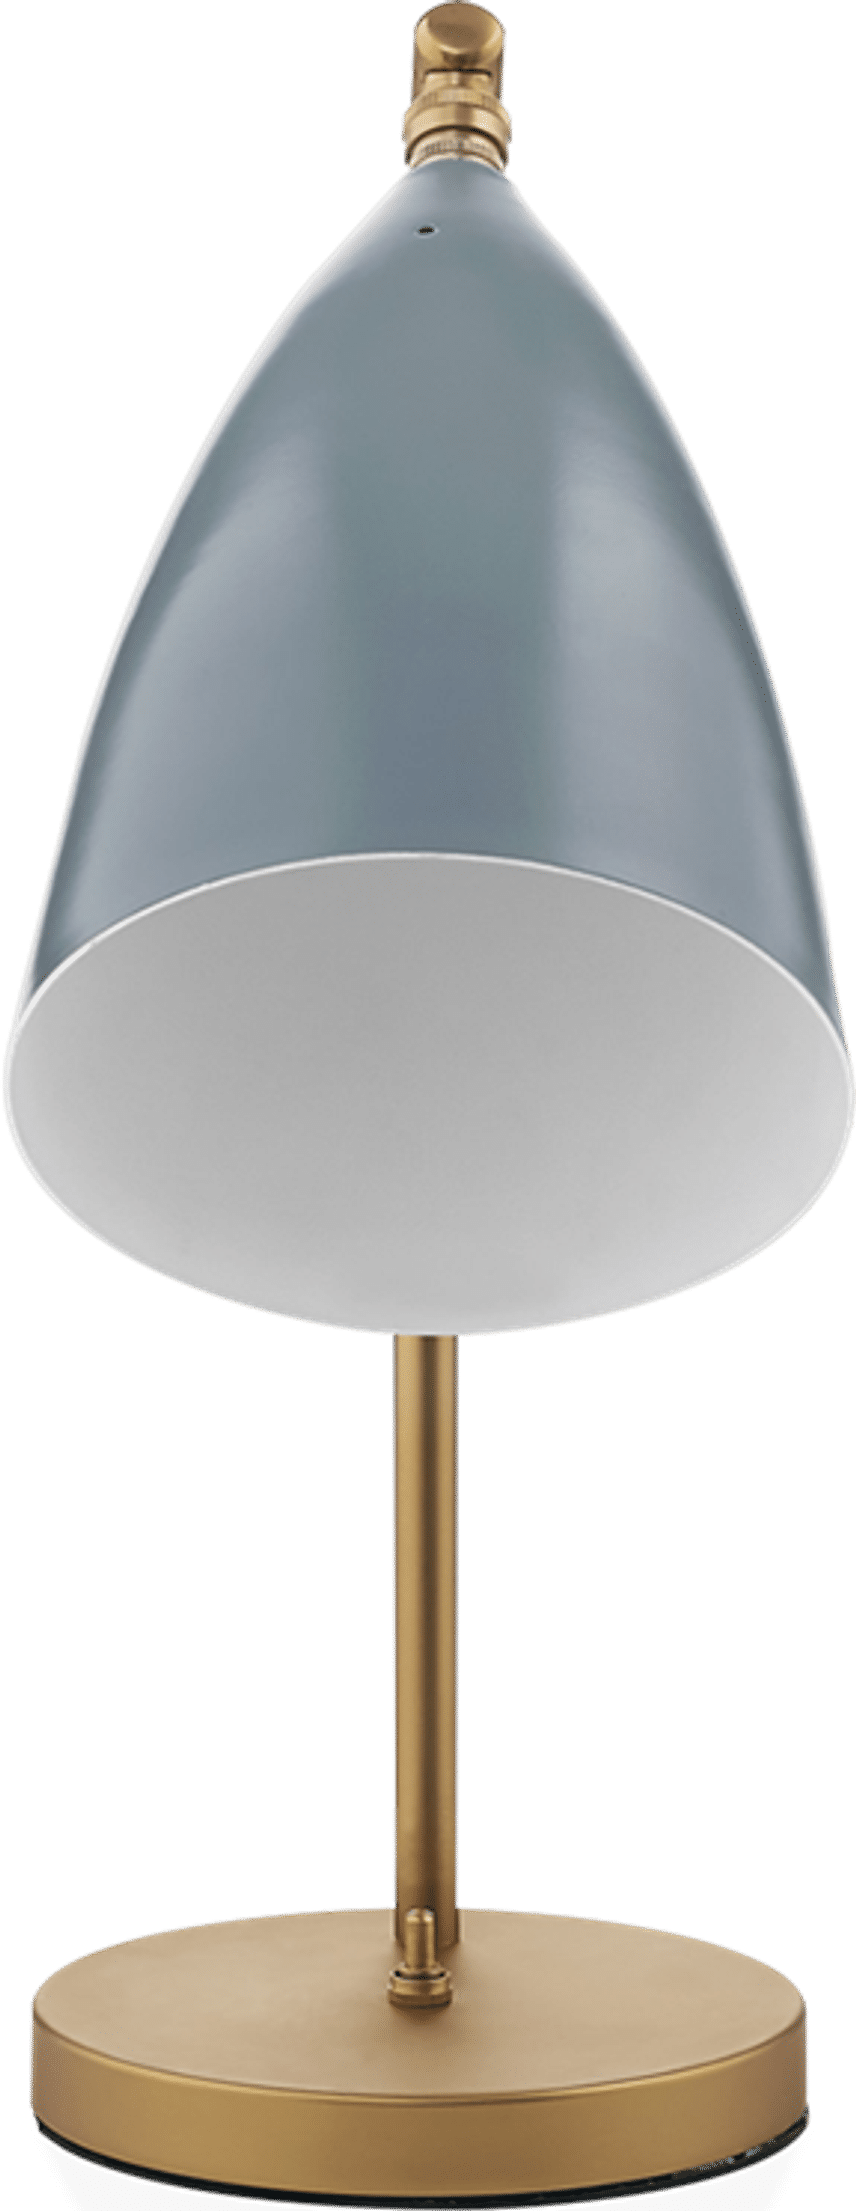 Grasshopper Style Table Lamp Grey image.